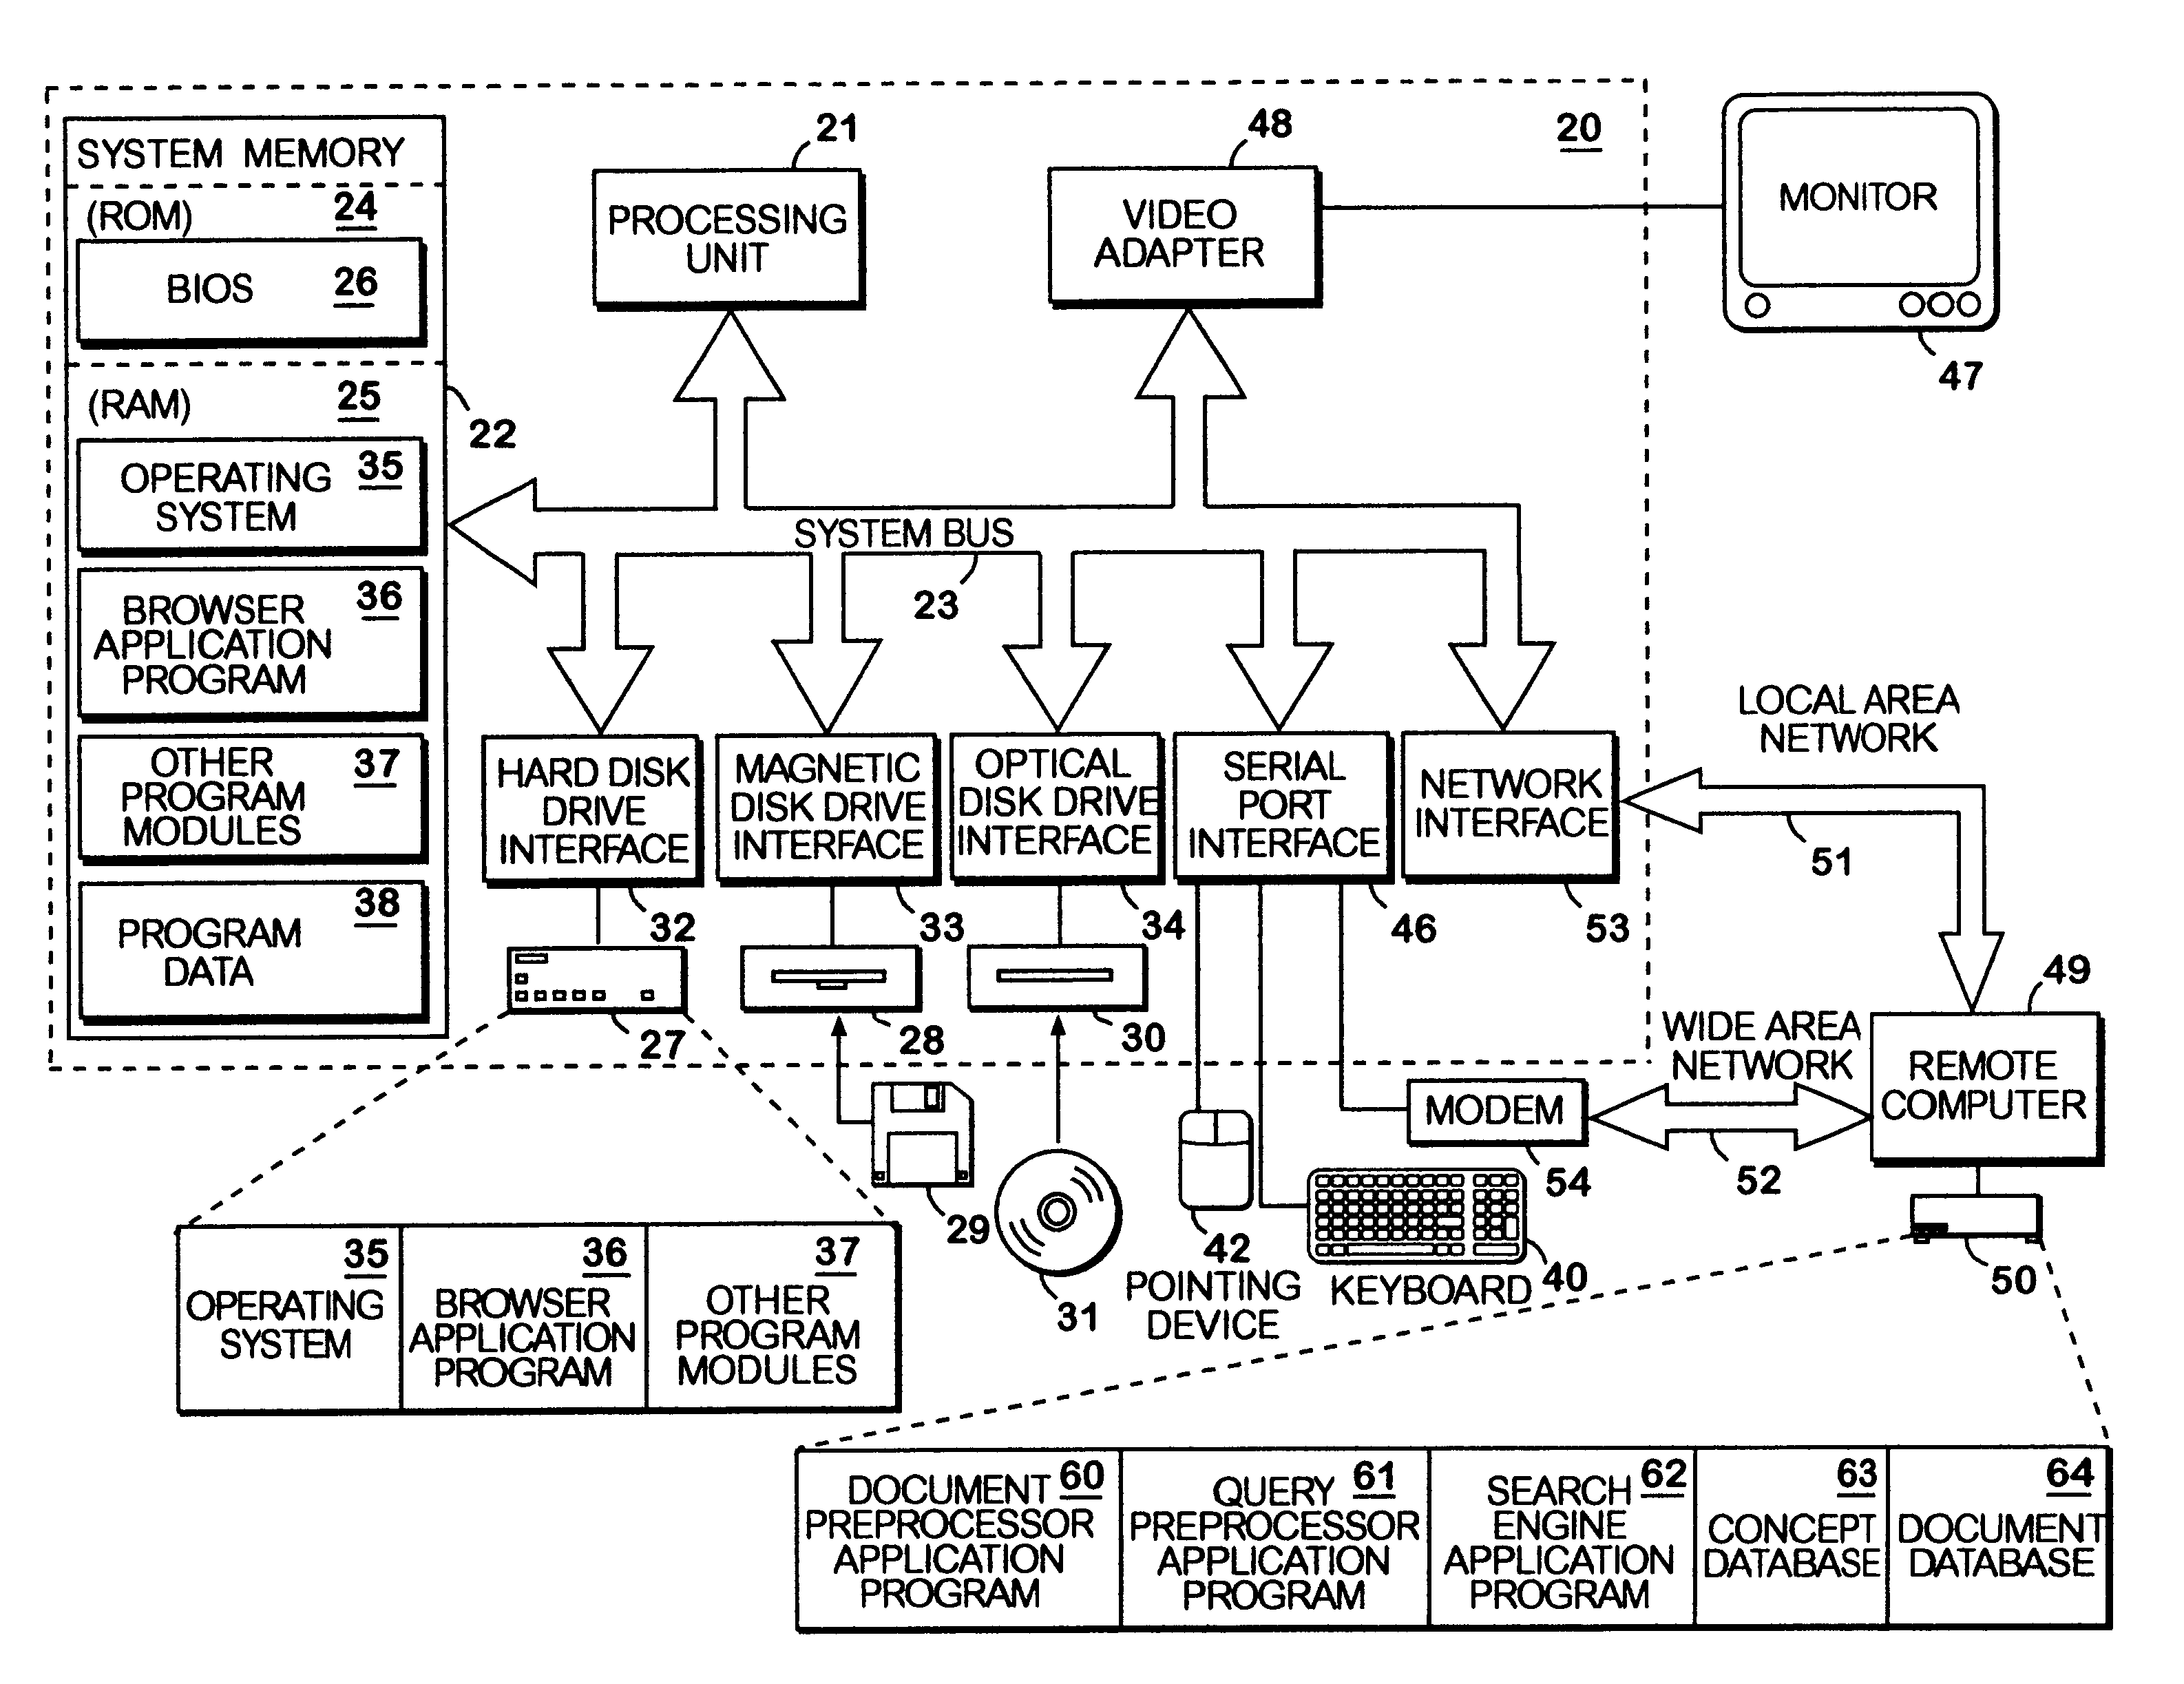 Method and apparatus for concept searching using a Boolean or keyword search engine